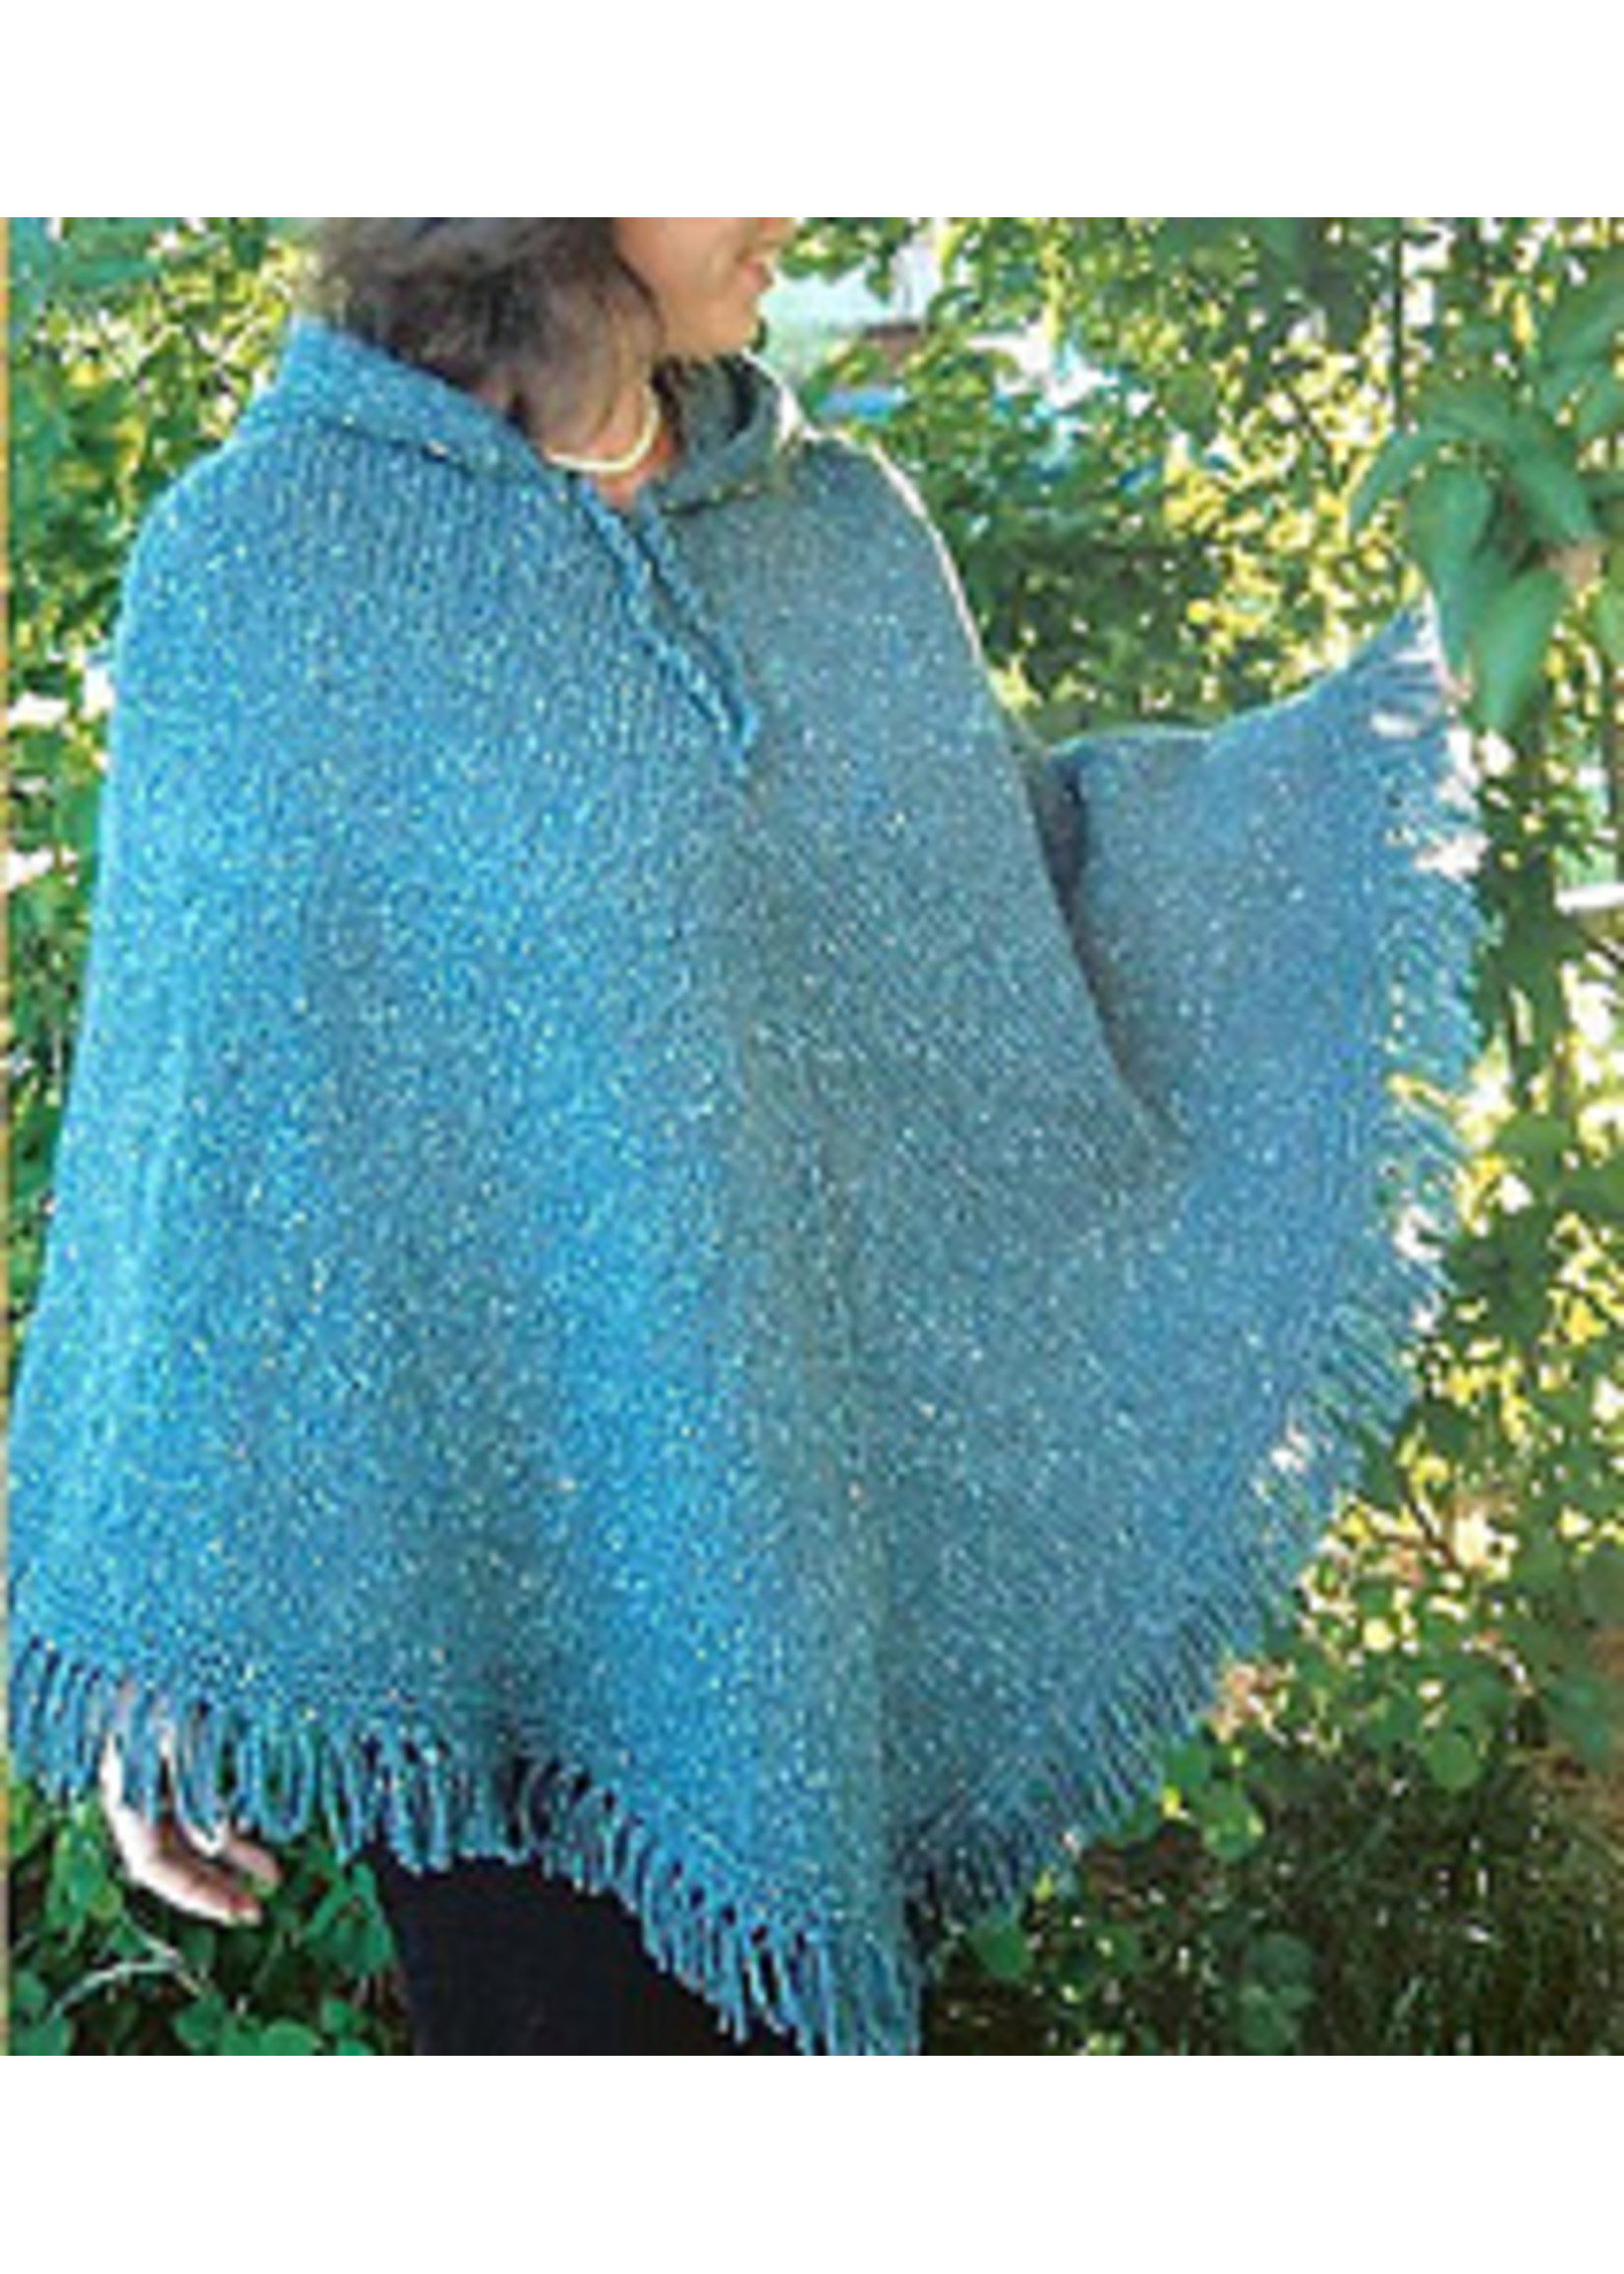 Knitting Pure & Simple Women's Poncho 246